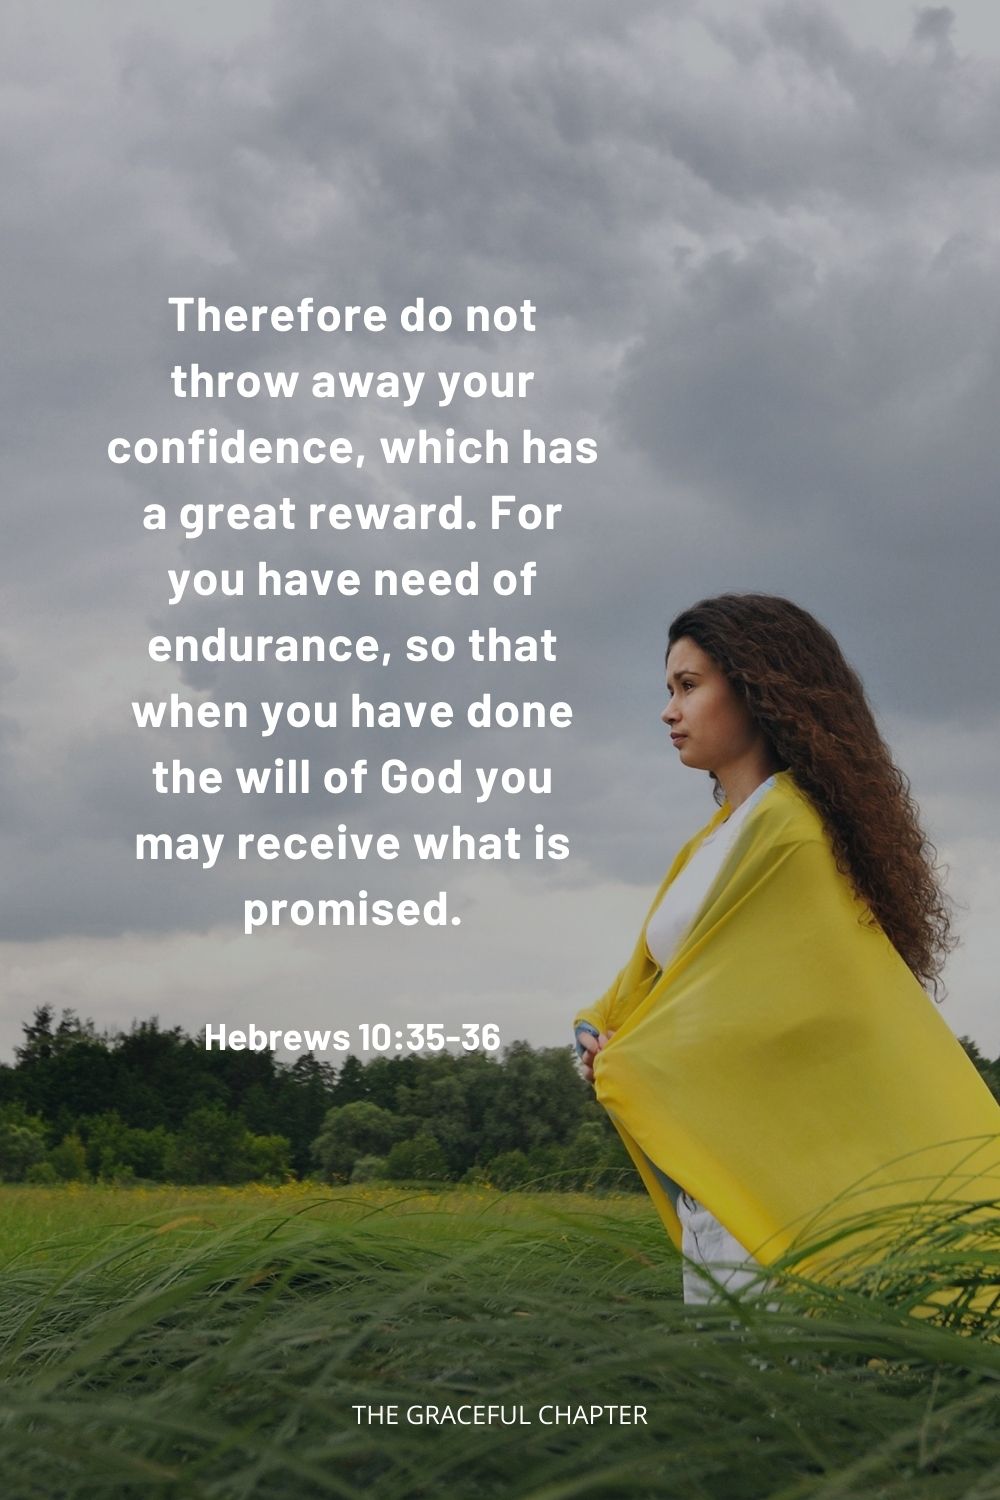 Therefore do not throw away your confidence, which has a great reward. For you have need of endurance, so that when you have done the will of God you may receive what is promised. Hebrews 10:35-36